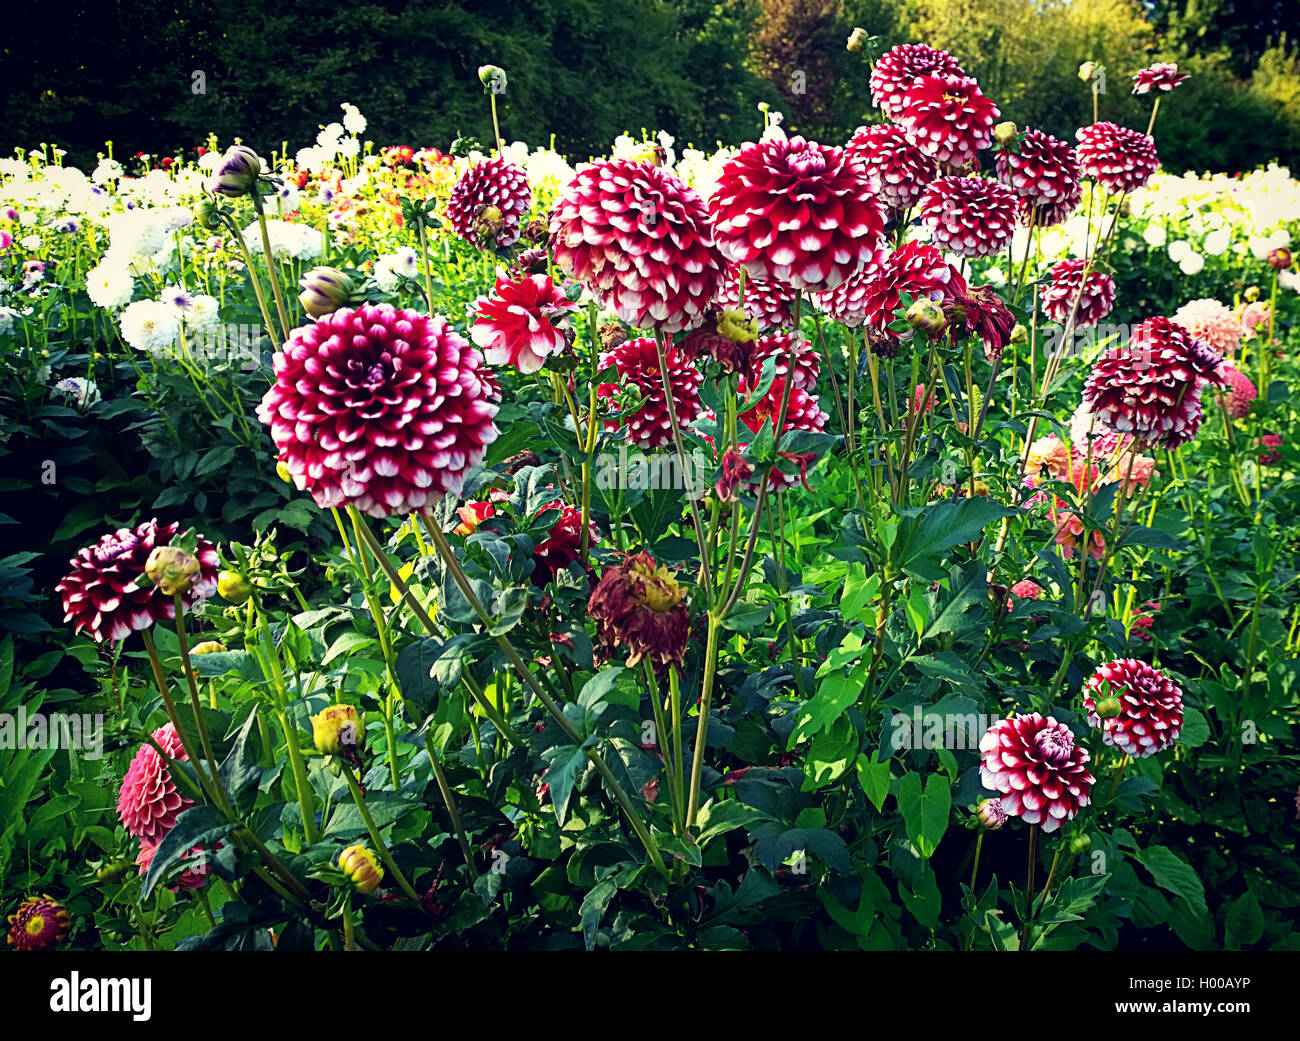 Dahlias with red-white variegated petals in cultivated field in summer Stock Photo